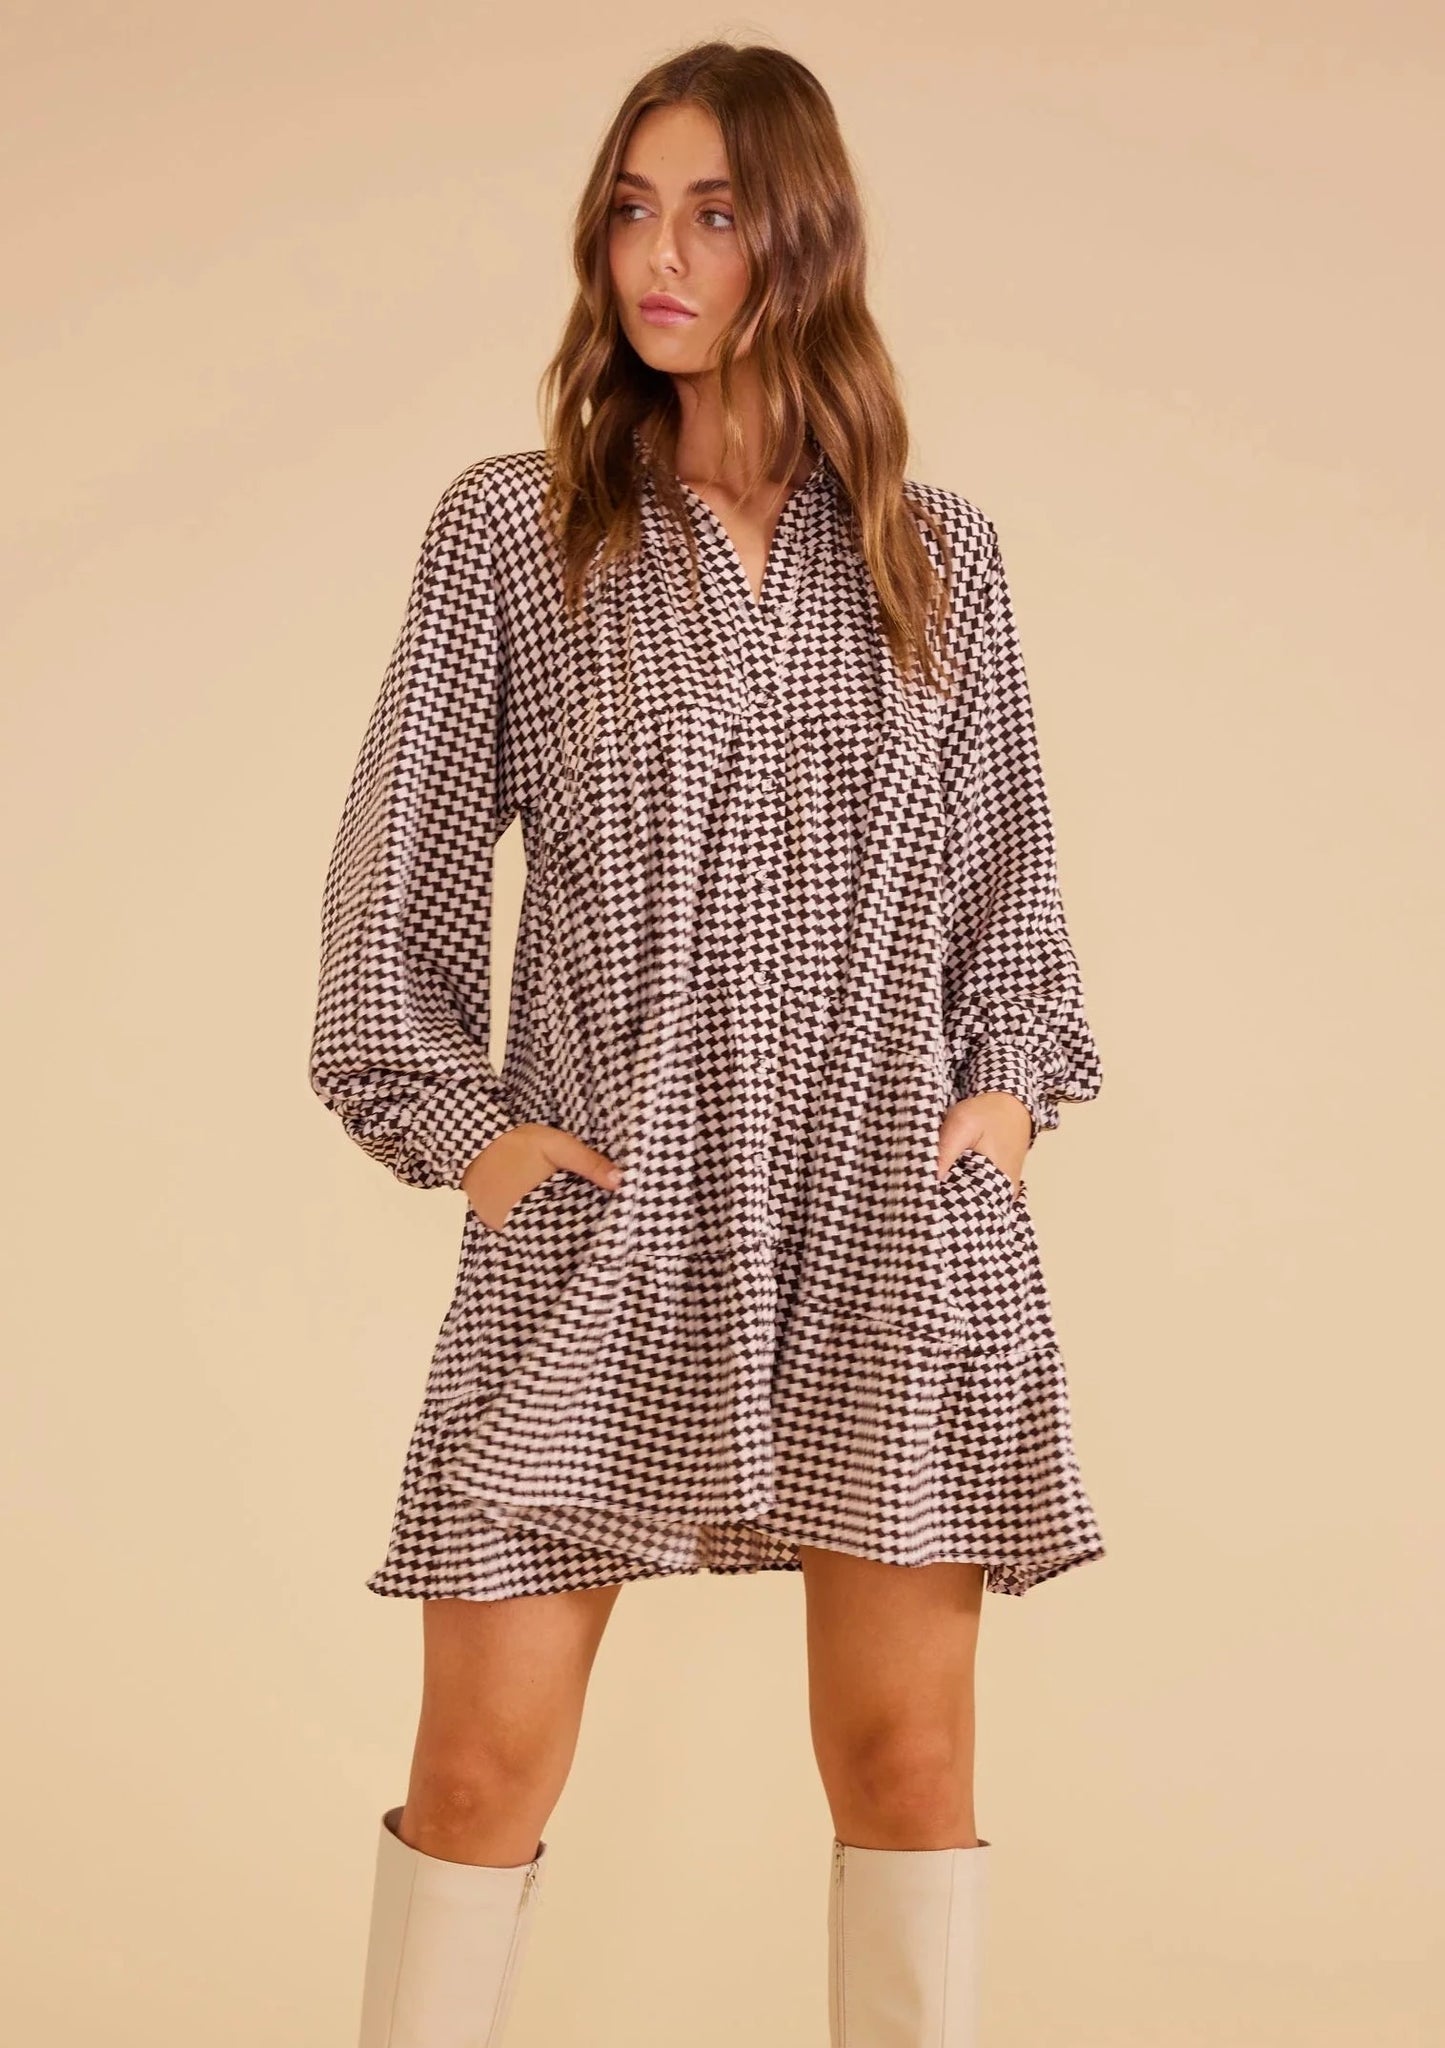 Quinley Mini Dress, by MinkPink - Checked long sleeve mini smock dress - Standard collar - Self covered fabric buttons with button down front - Functional side pockets - Smock silhouette with tiers - Full length blouson sleeves with two-button cuffs - Silky handfeel